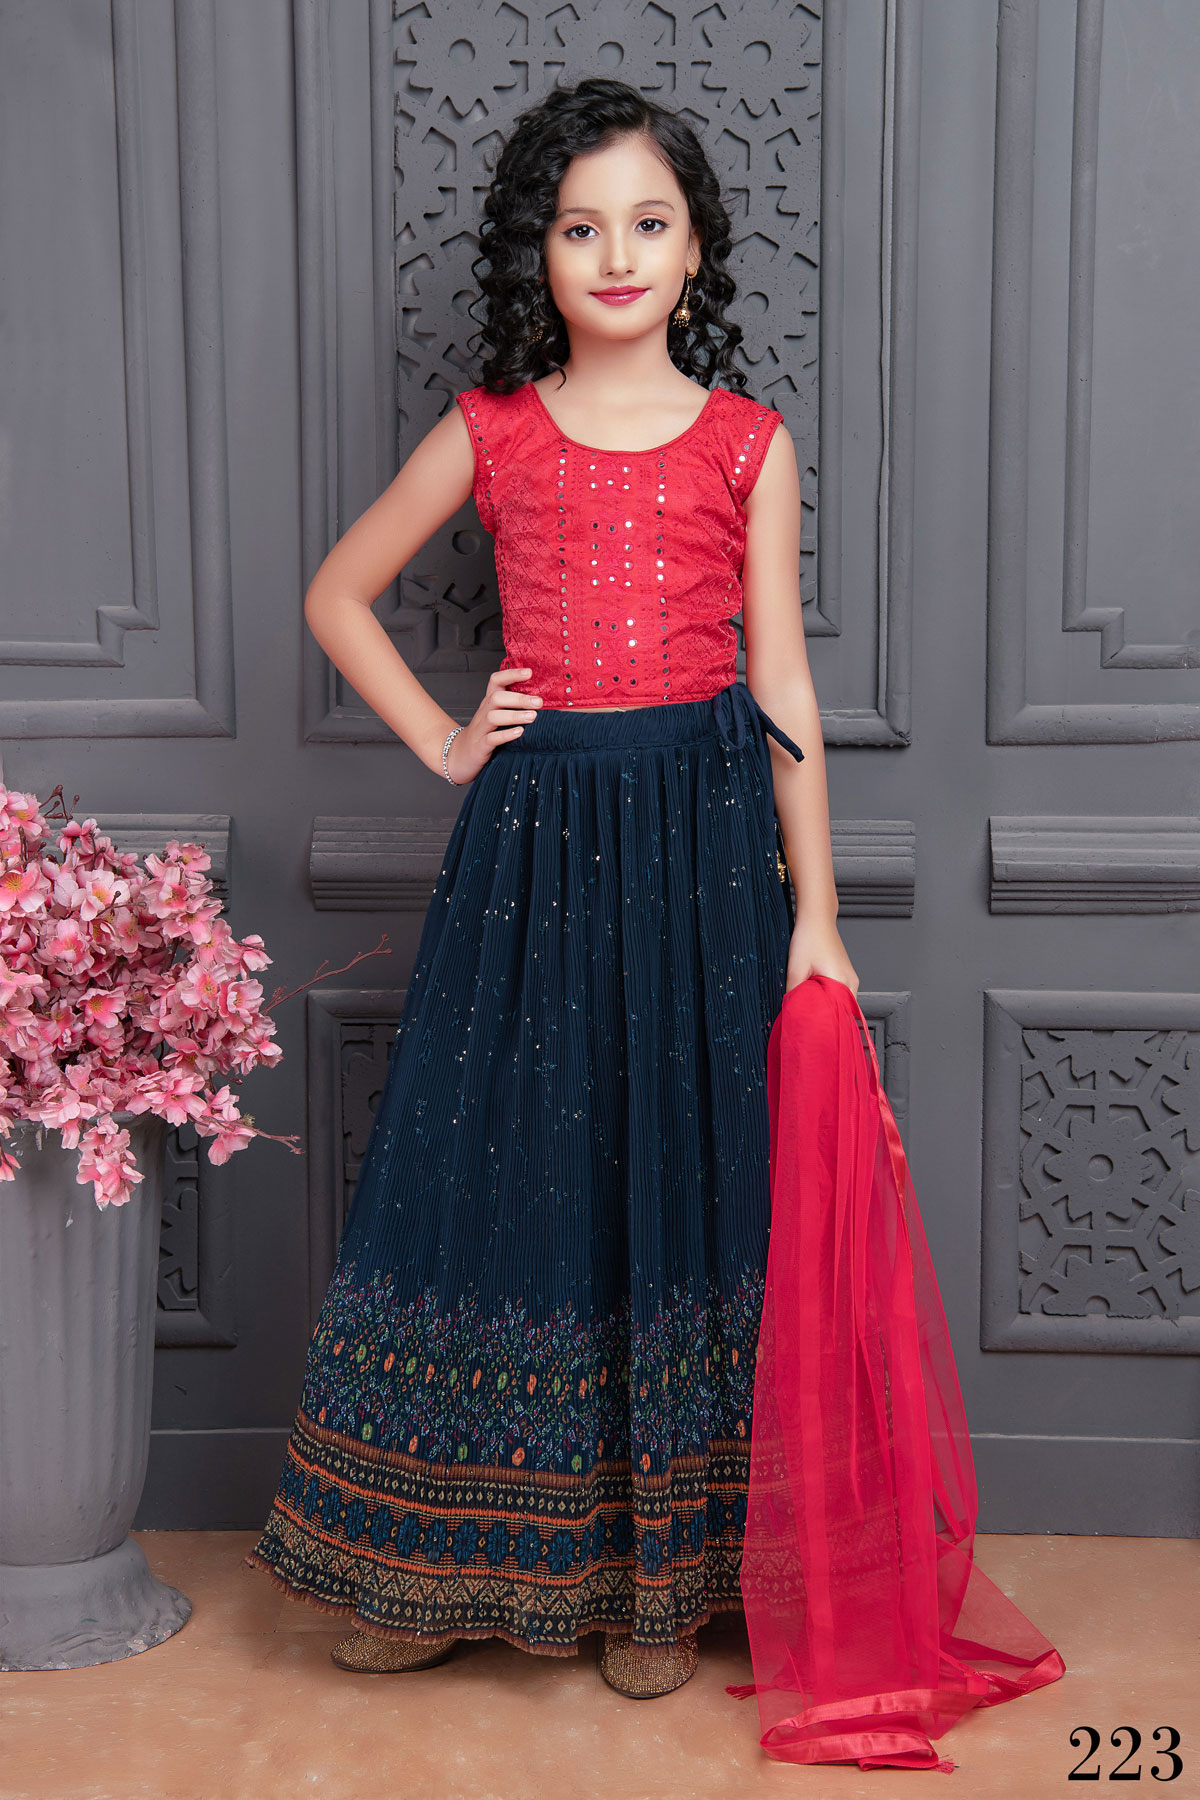 Peacock Blue with Light Blue Shaded Silver Zari and Sequins work Lehenga  Choli for Girls | Dresses kids girl, Girls dresses sewing, Kids dress